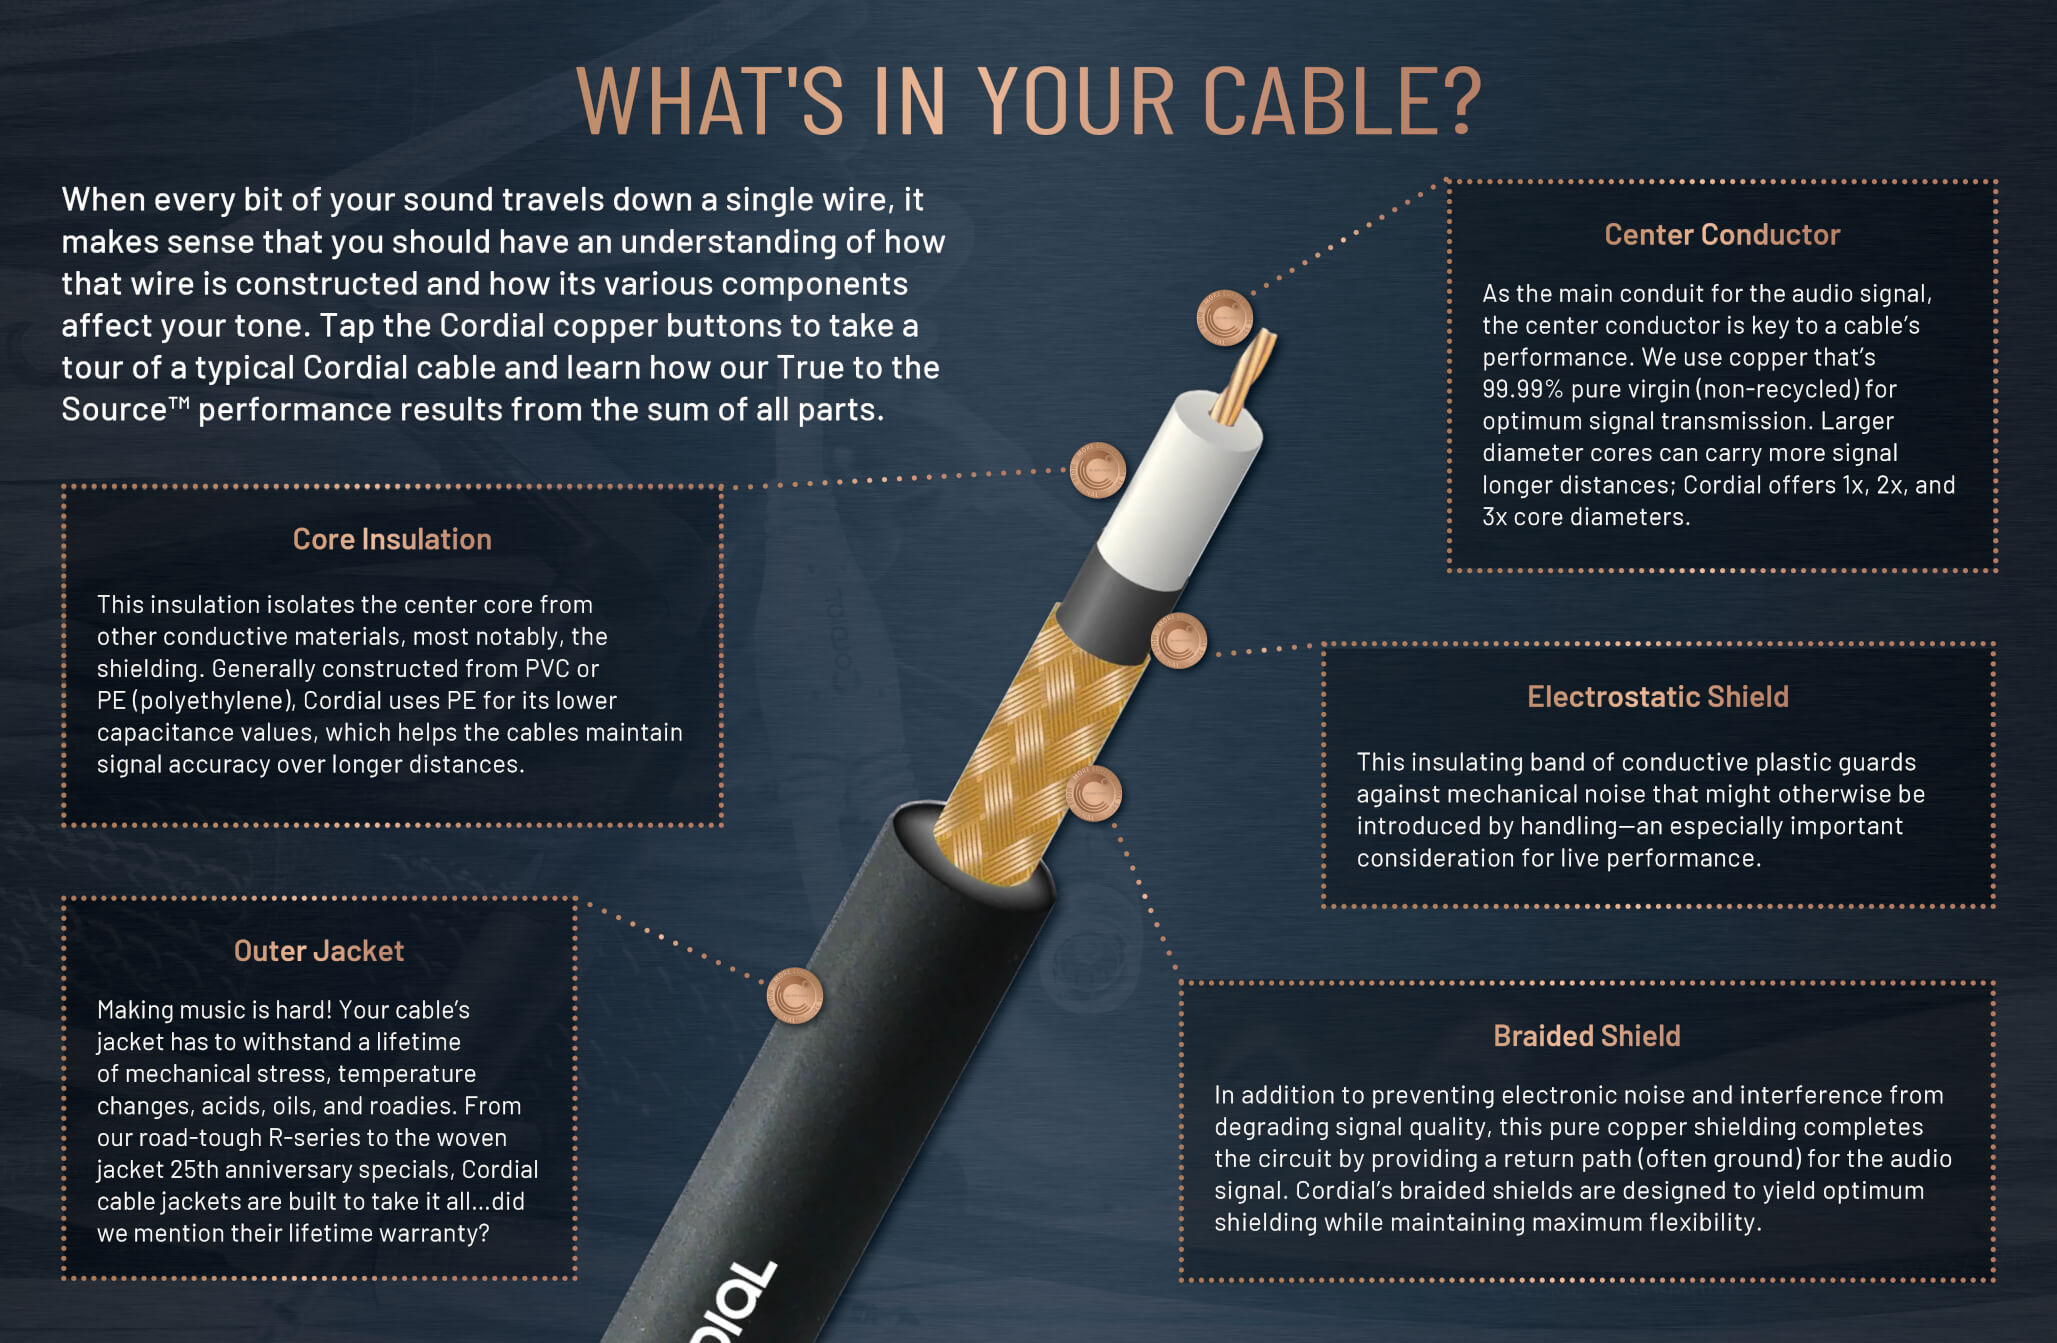 What's in your cable?